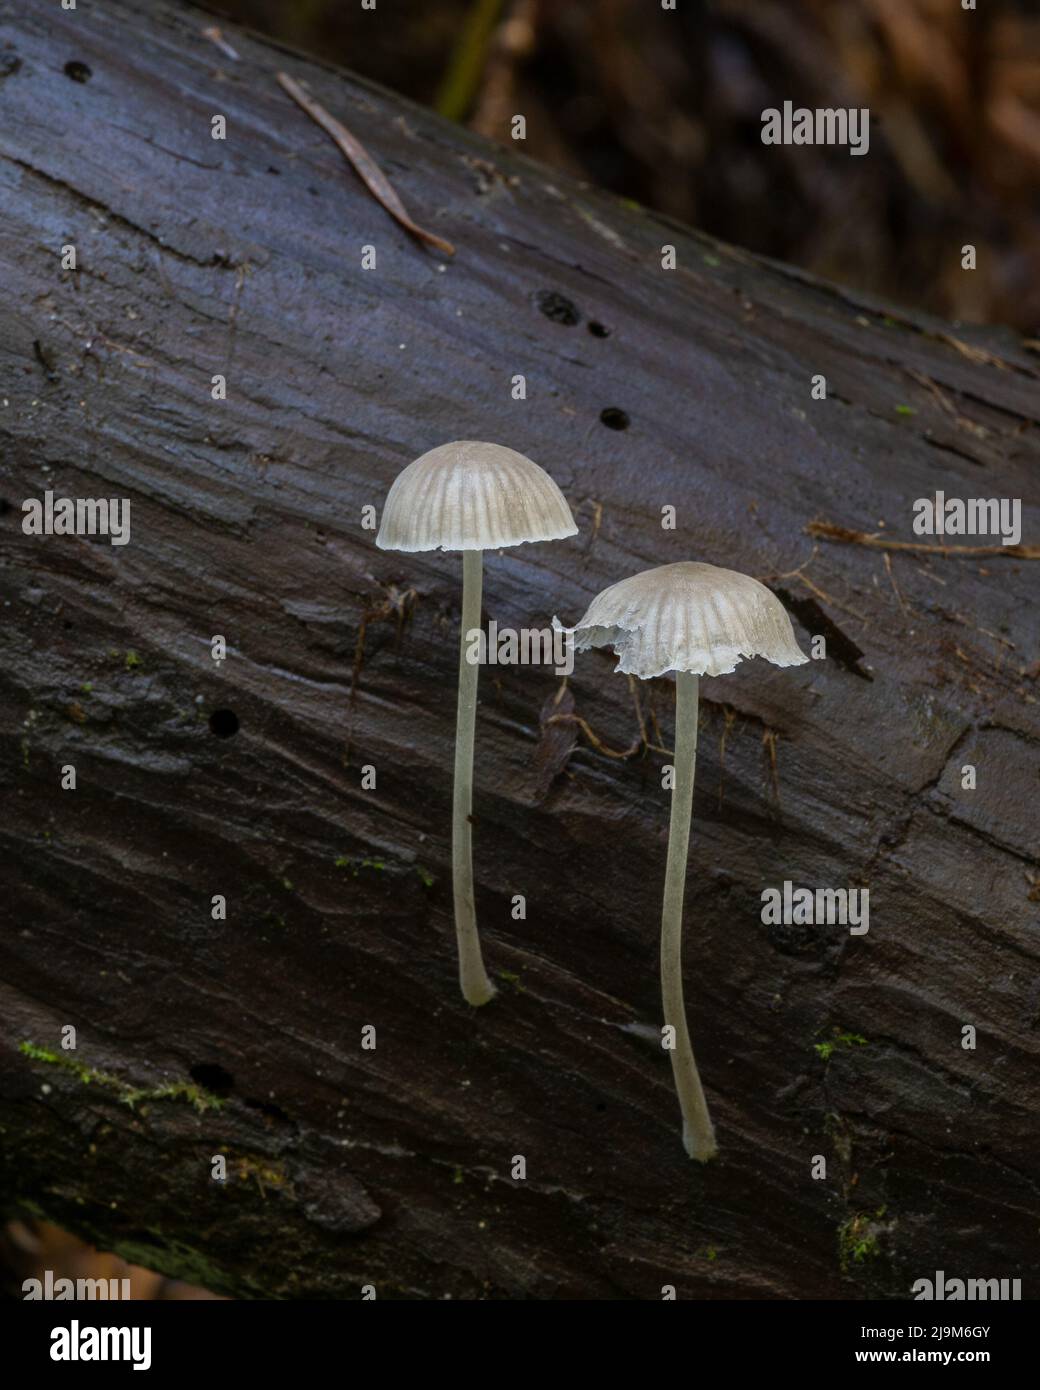 Two white cap mushrooms coming out of a wet decomposing trunk, Santa Cruz County, California, USA Stock Photo